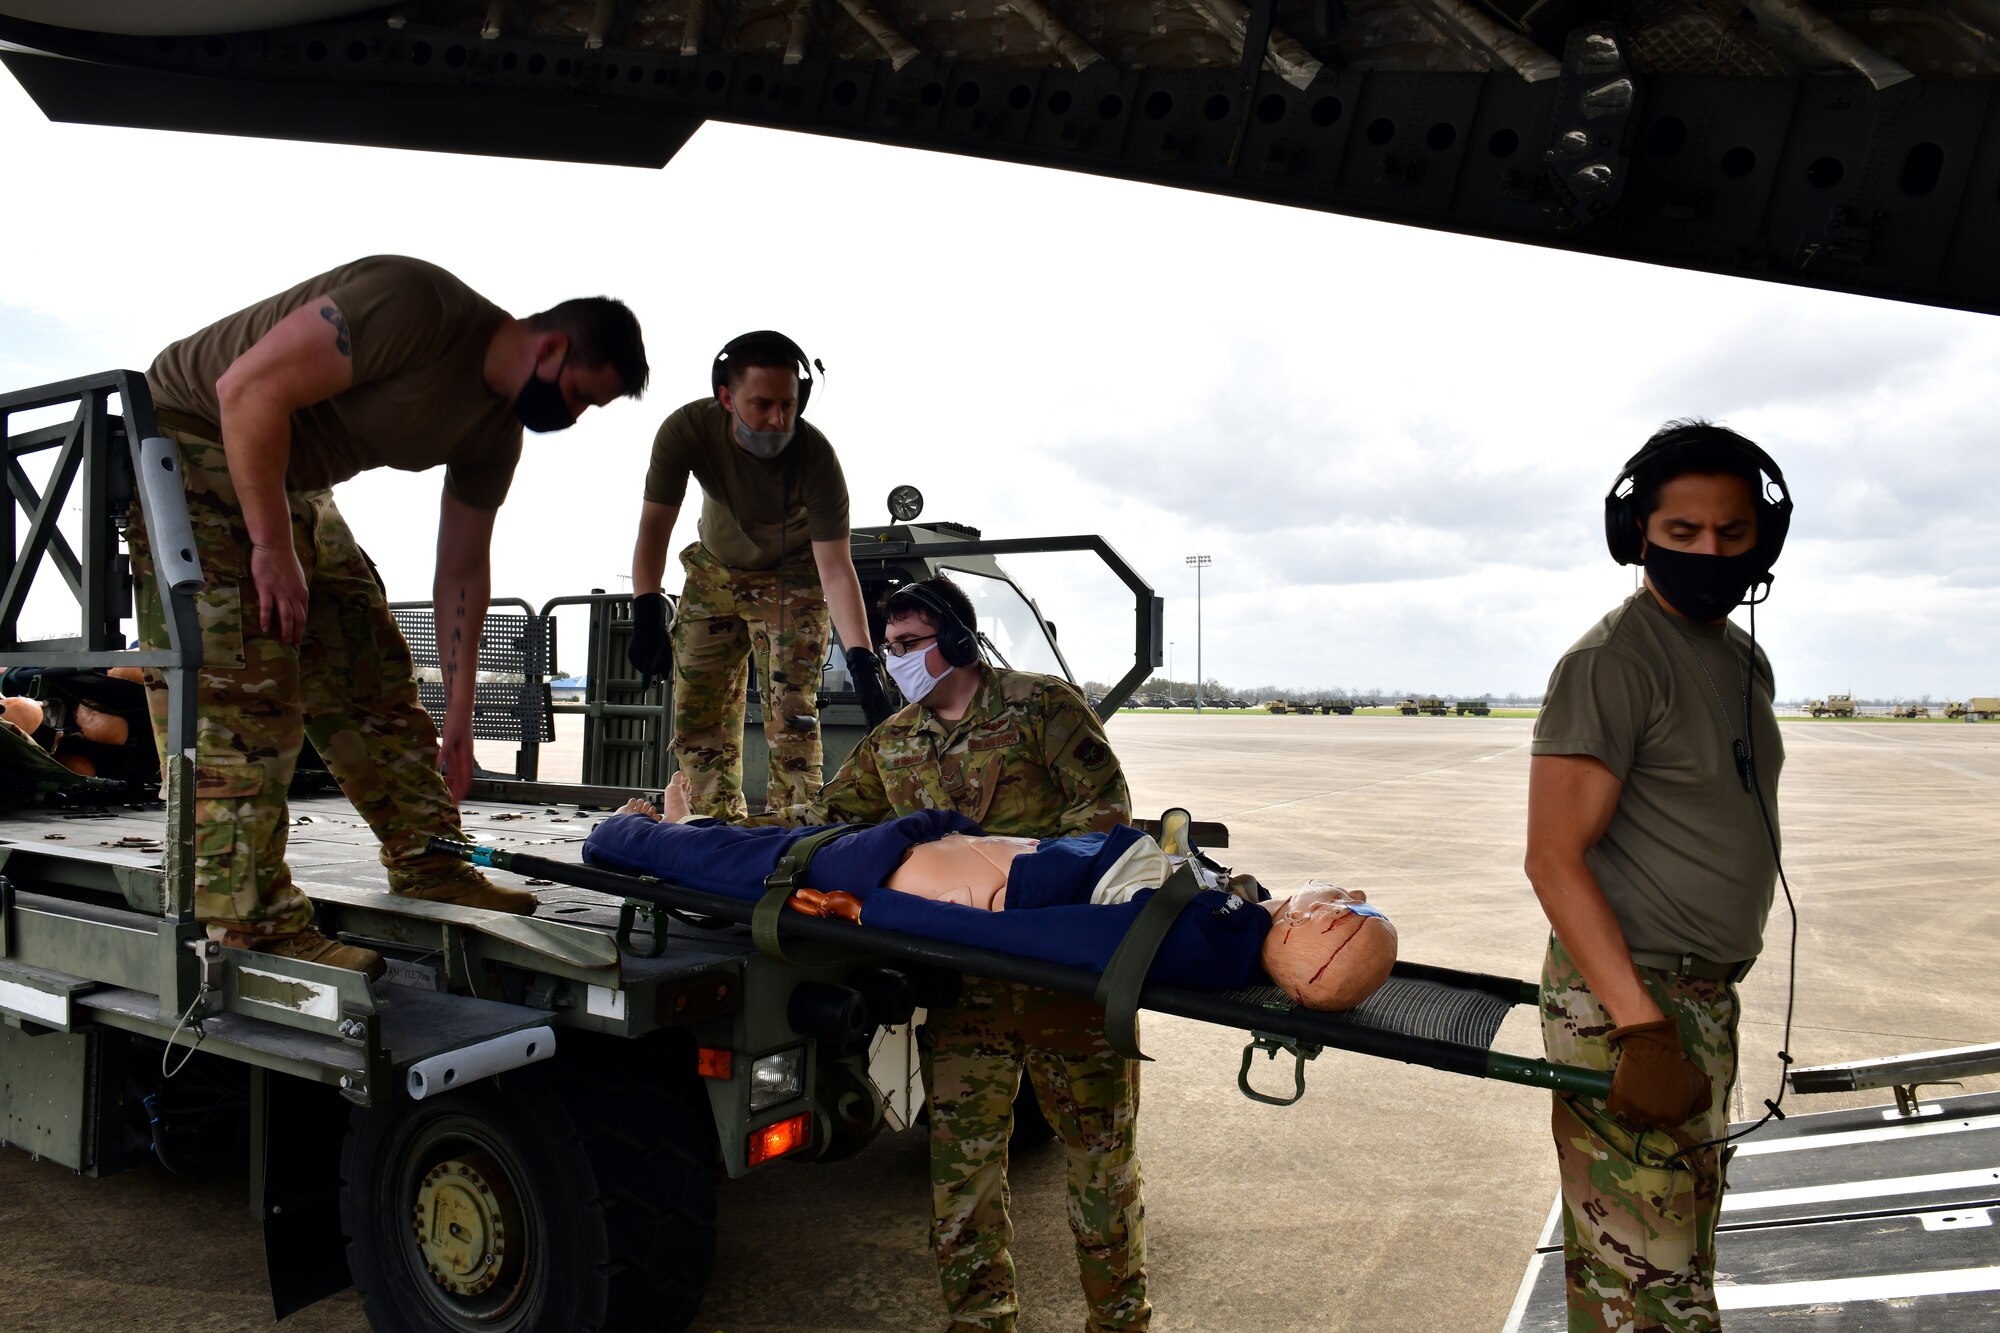 Airmen transload simulated patients onto a C-17